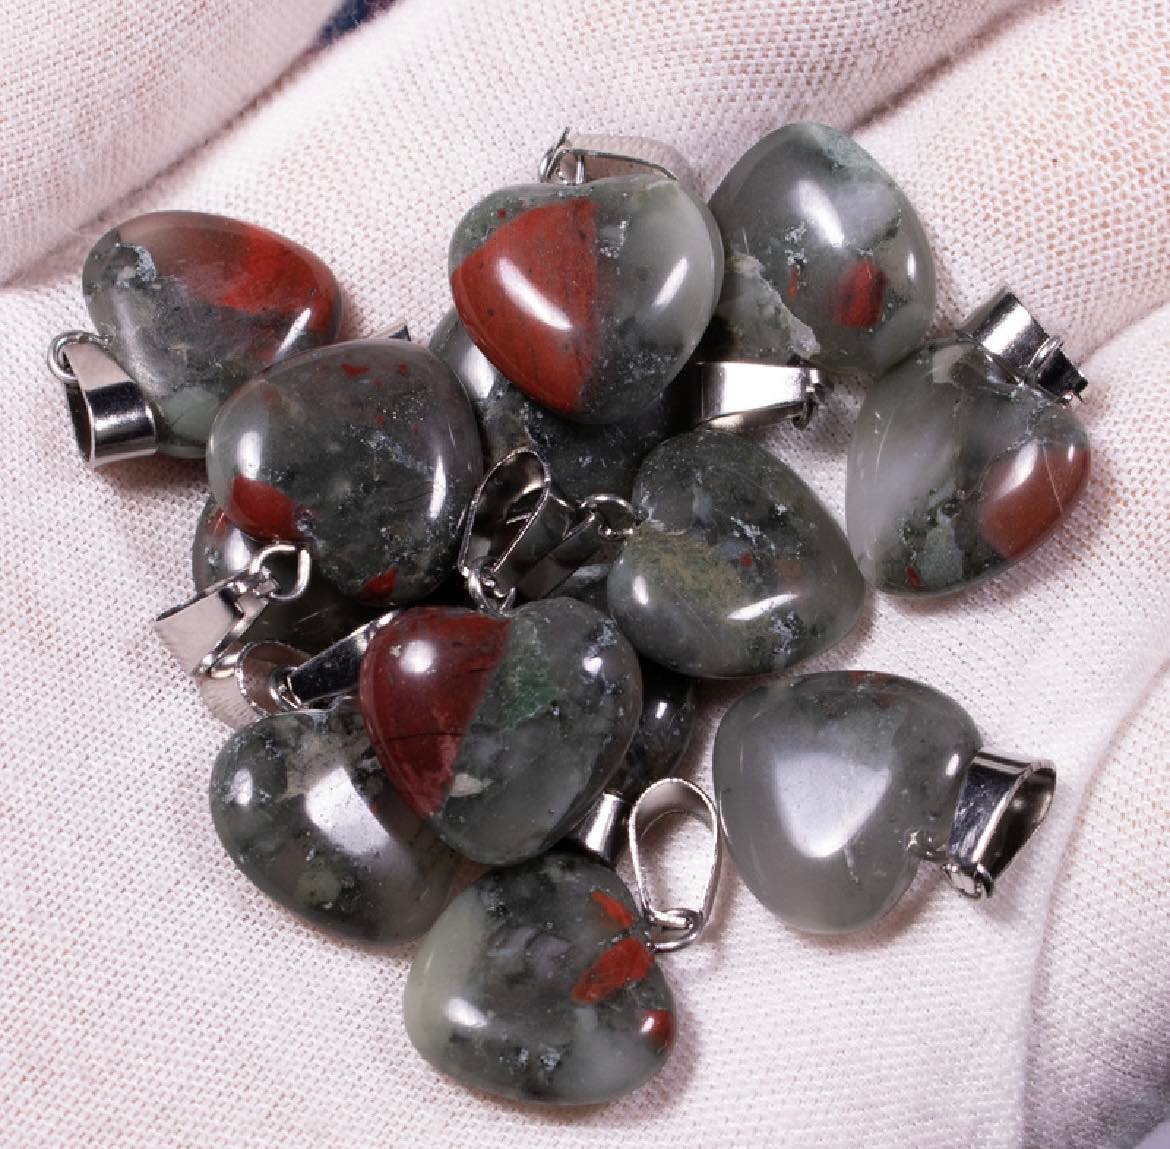 African Blood Stone Heart Pendant - 15mm - 2g - China - NEW123